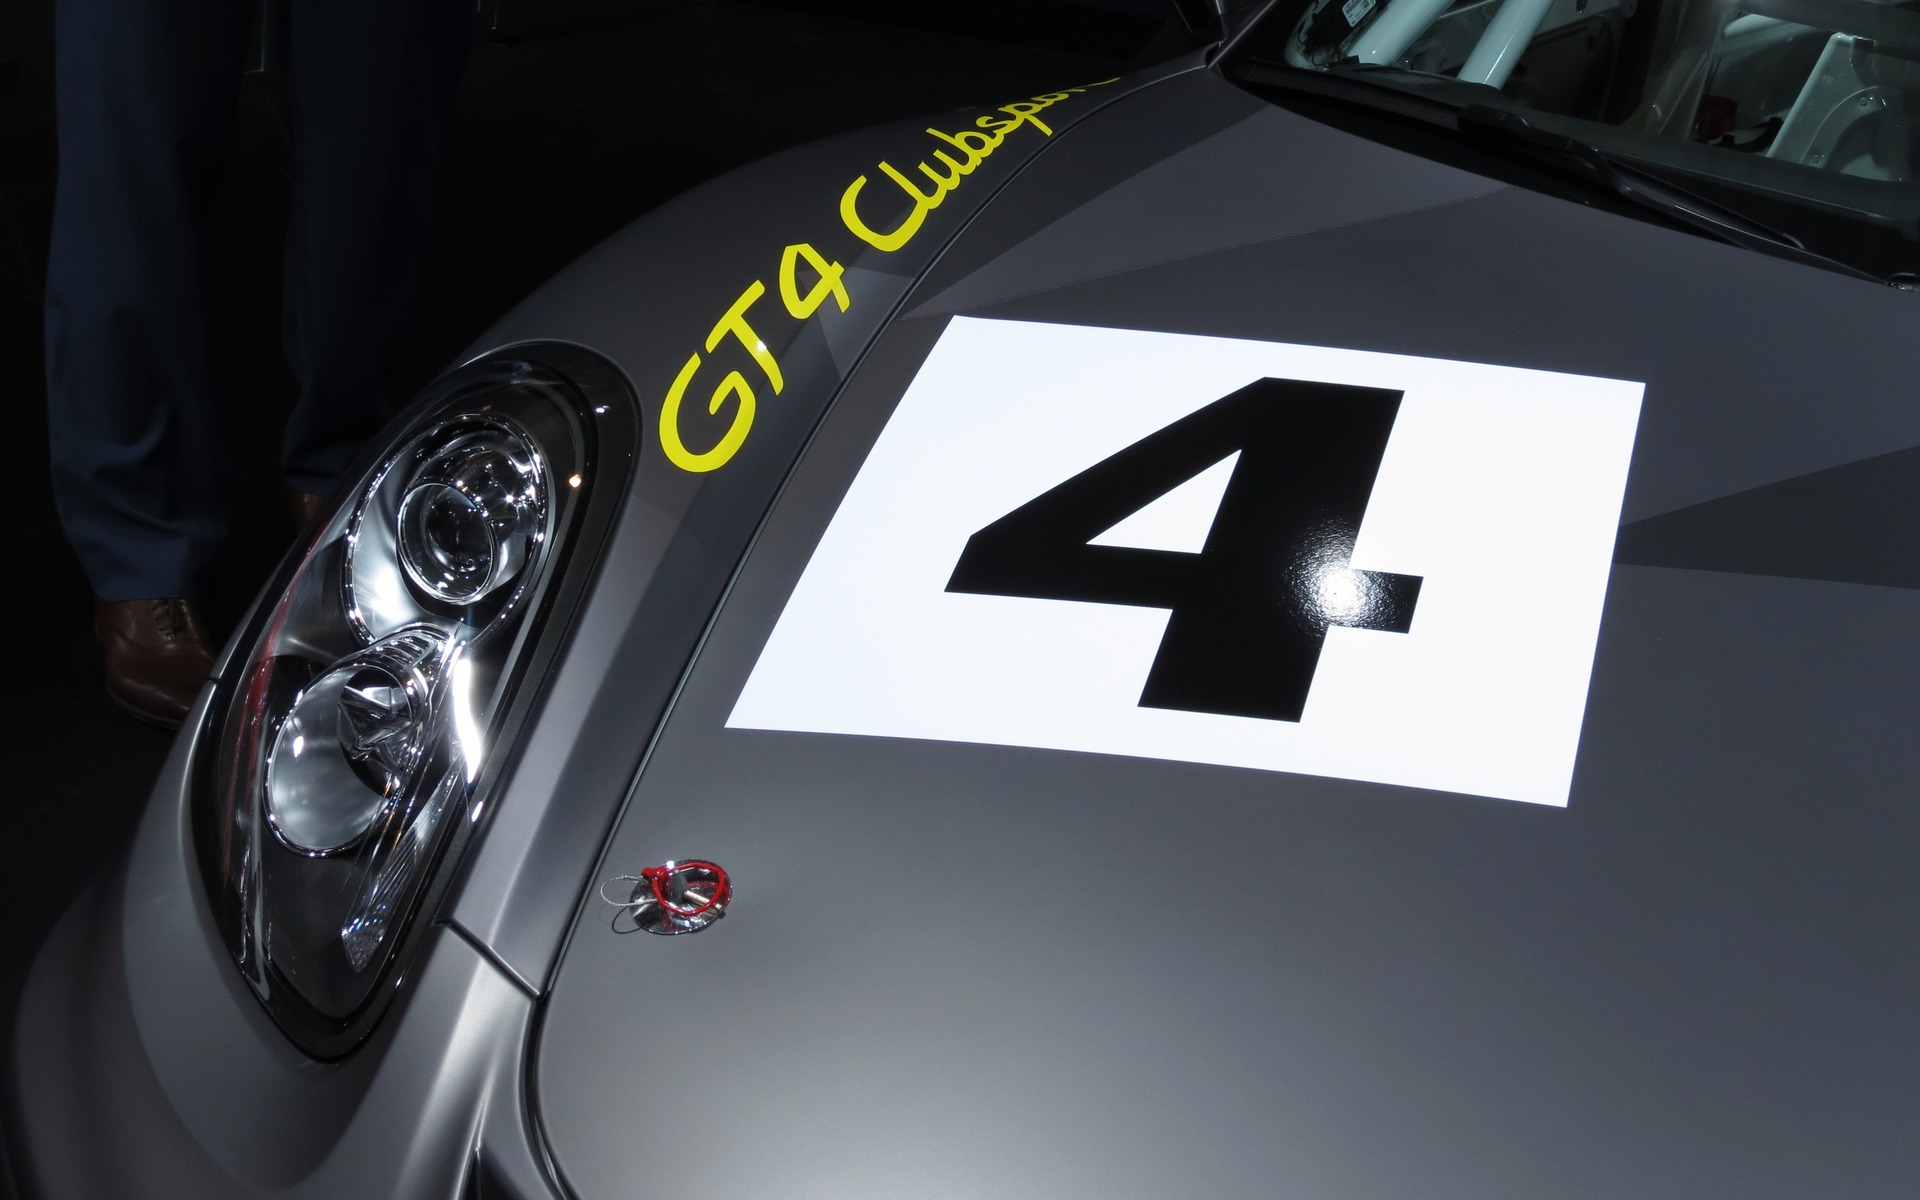 The Cayman GT4 Clubsport will be ready to race as delivered.